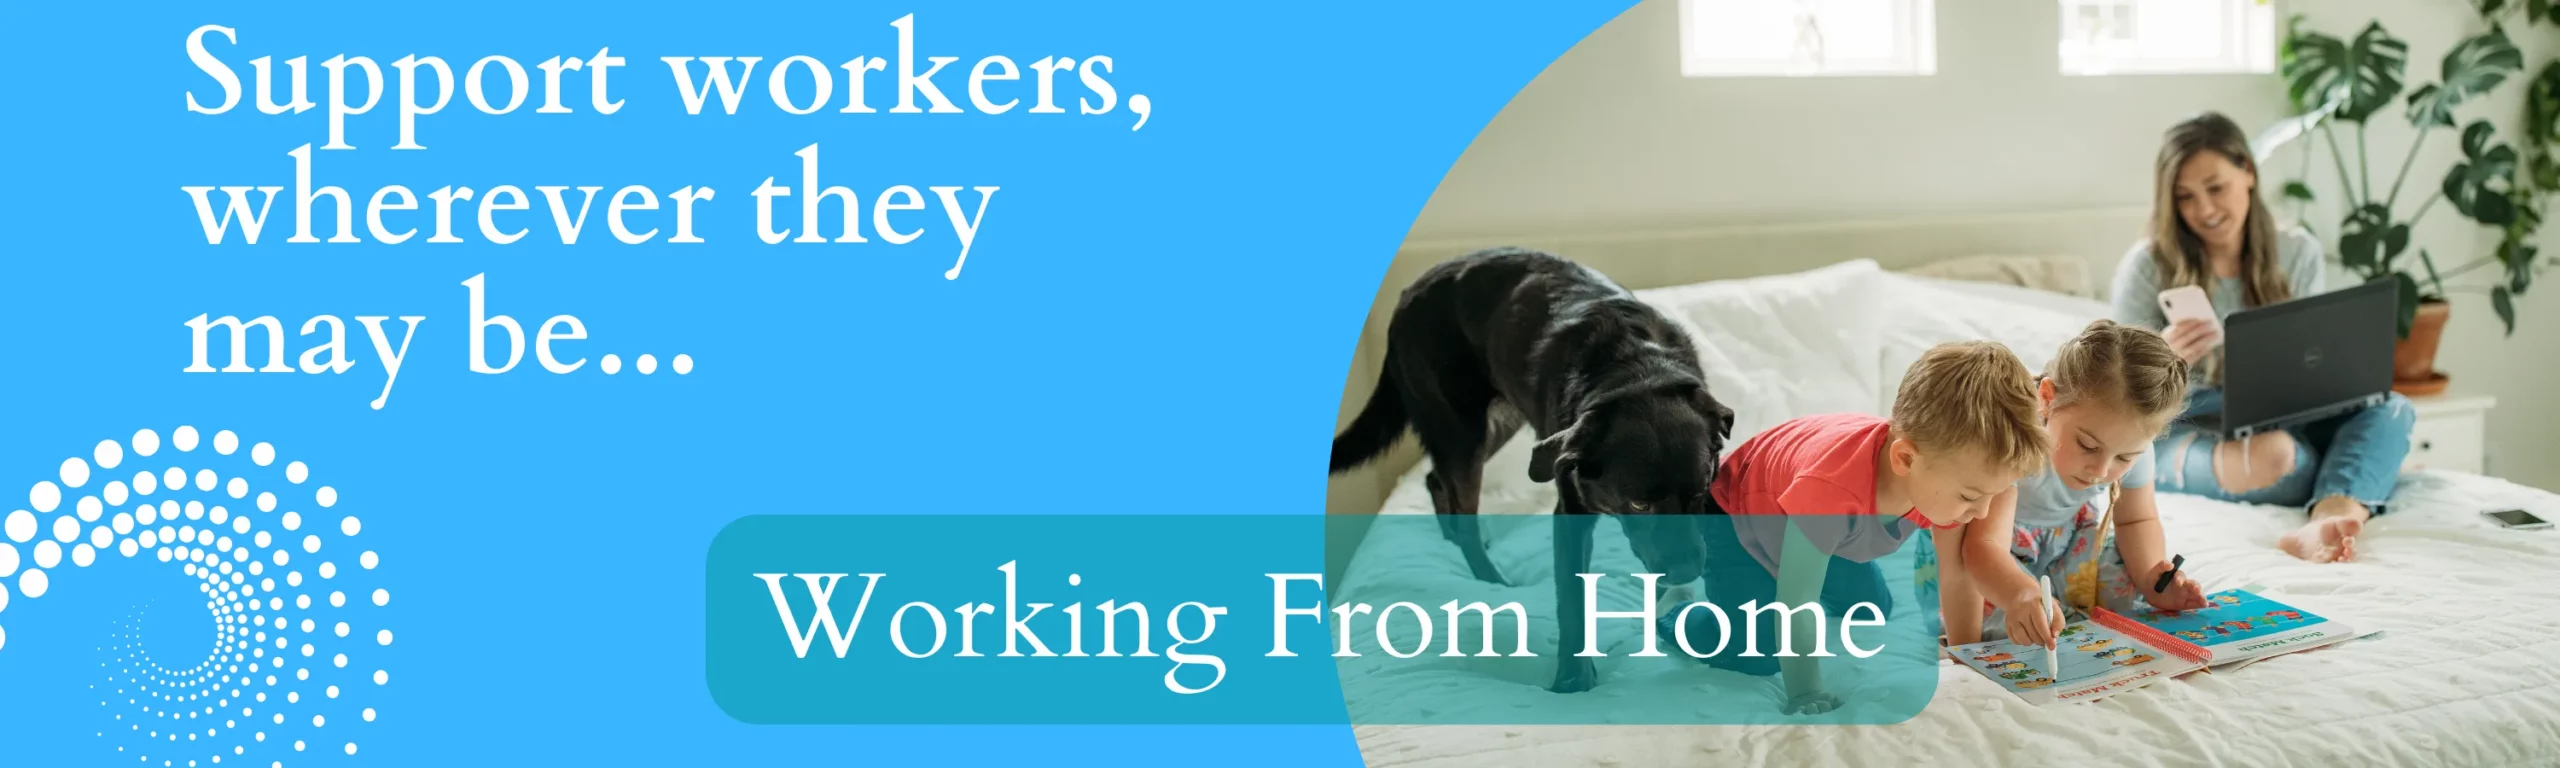 Interiors Working From Home Banner